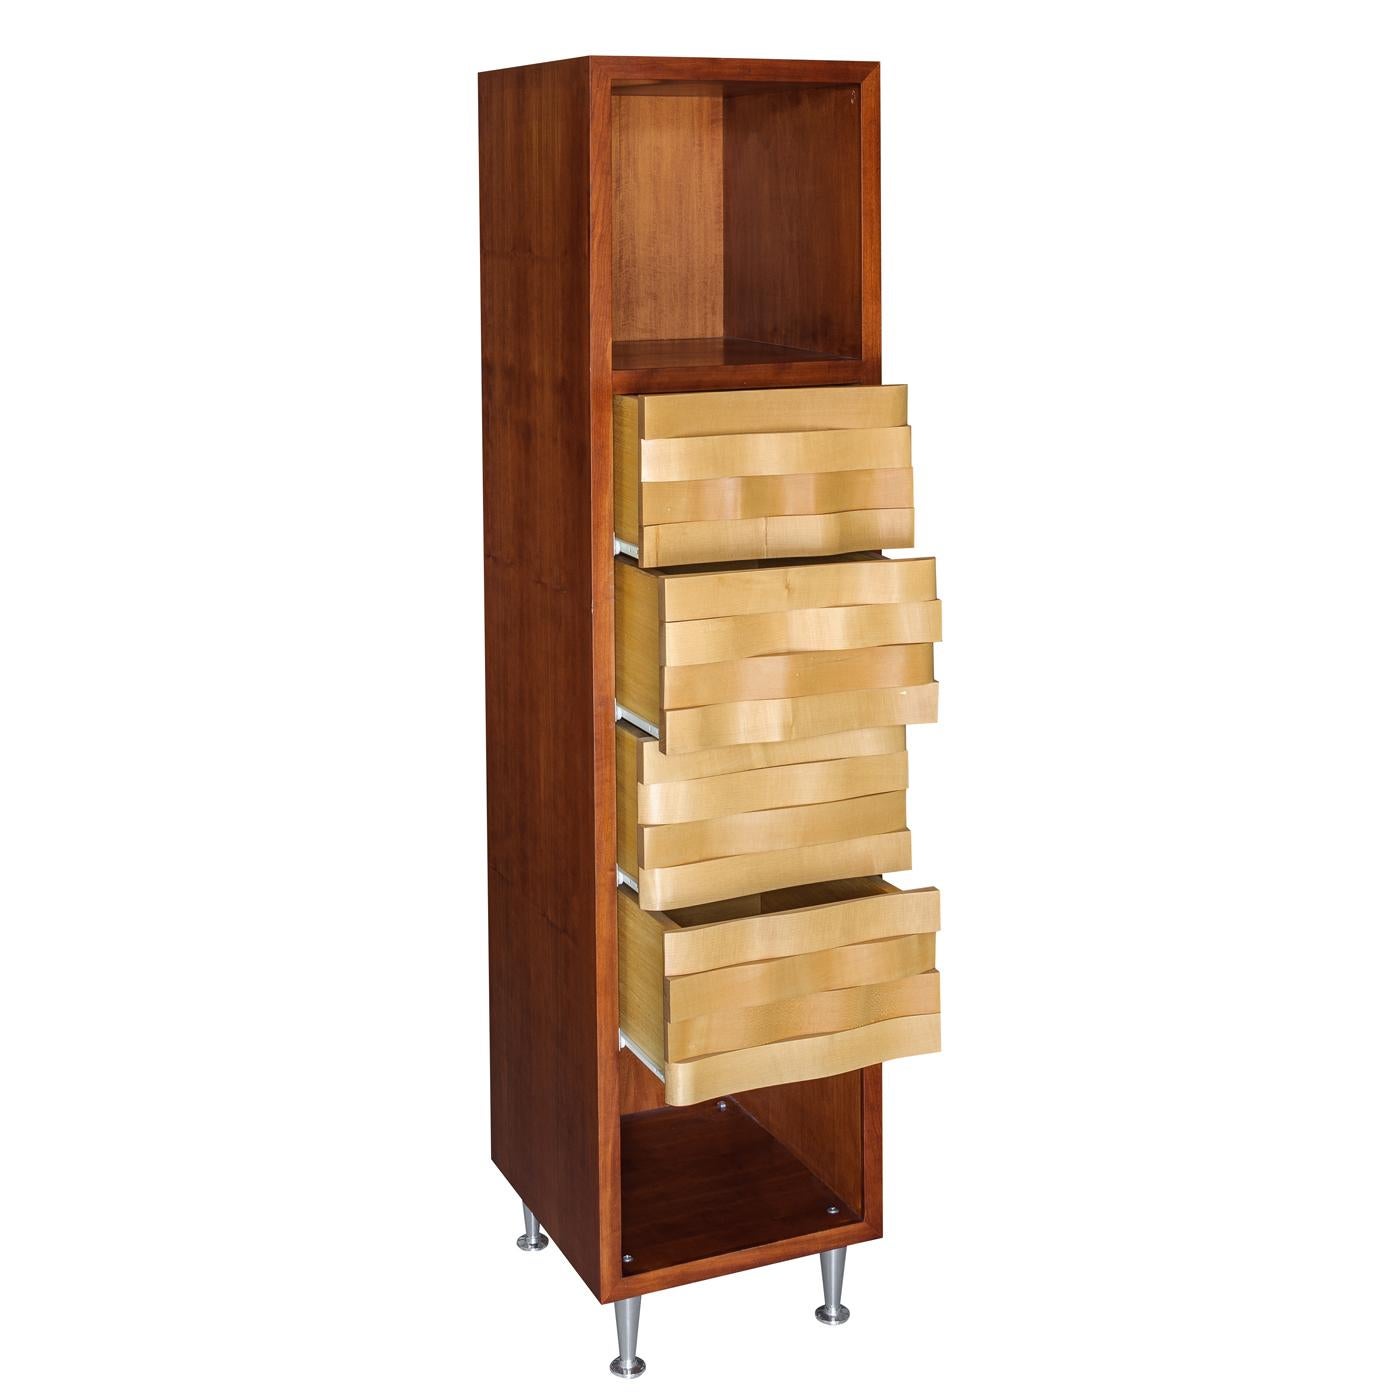 Exceptional construction and masterful craftsmanship define this stunning cabinet. Fashioned entirely of cherrywood, this tall, rectangular cabinet features two open shelves and four drawers and is supported by conical metal feet. The linearity of